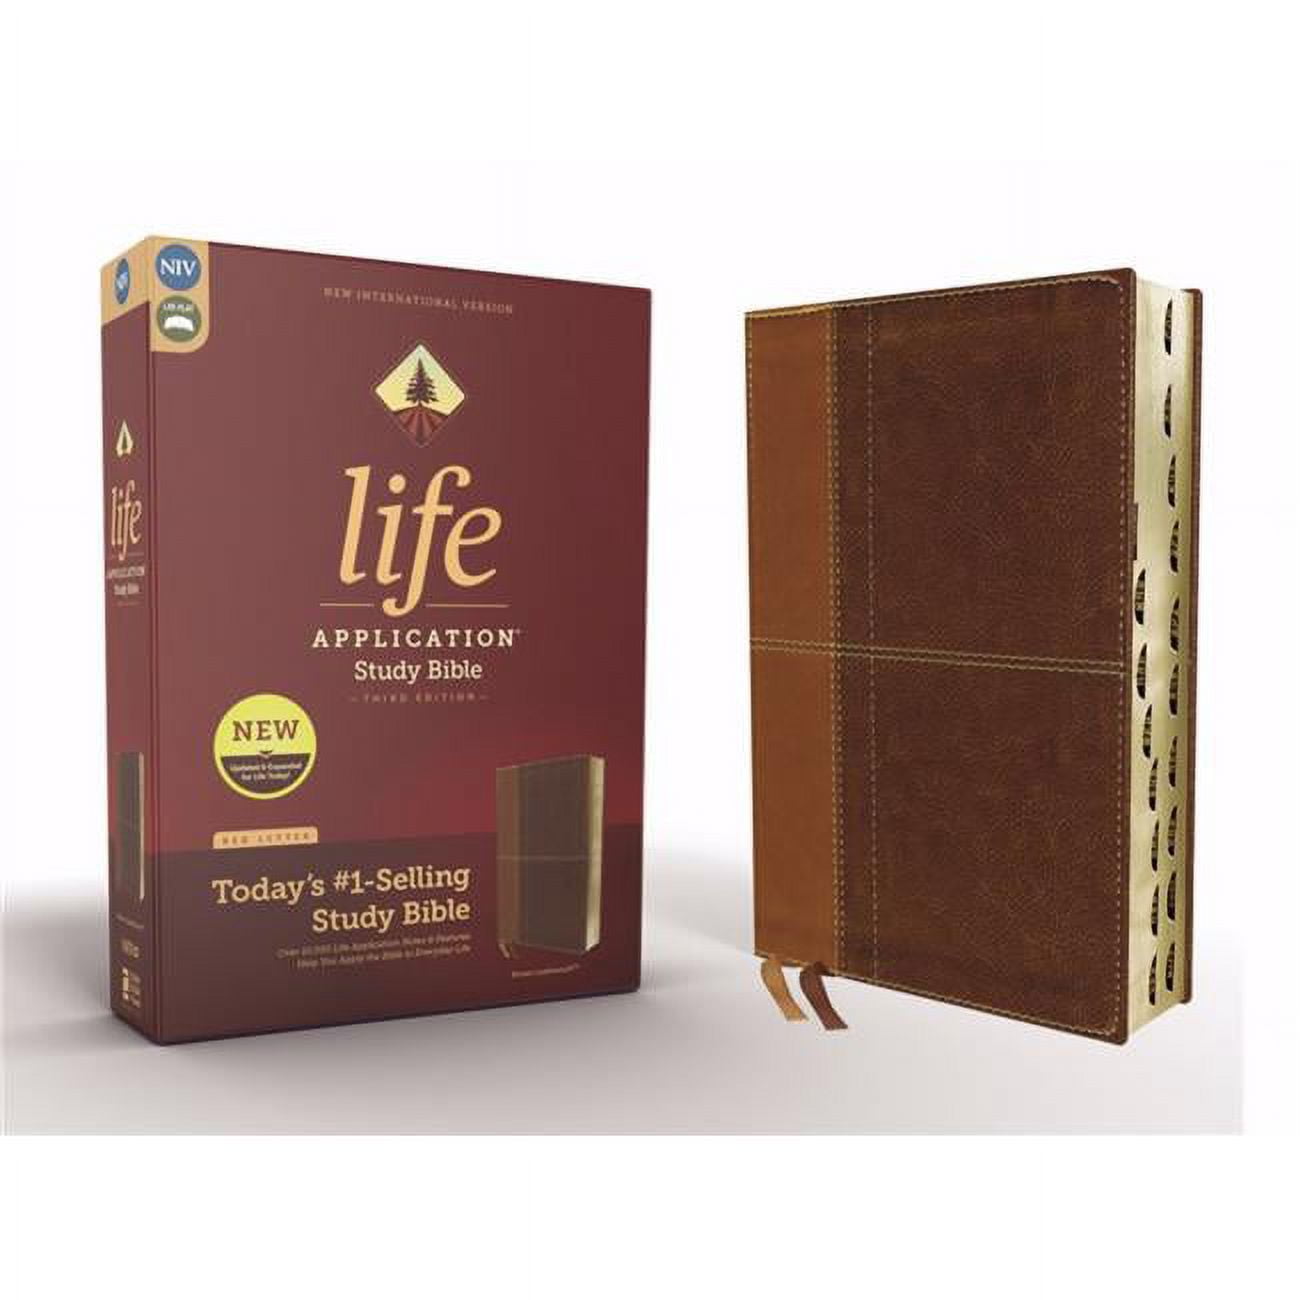 138362 NIV Life Application Study Bible - Third Edition, Tan & Brown Leathersoft Indexed -  Zondervan